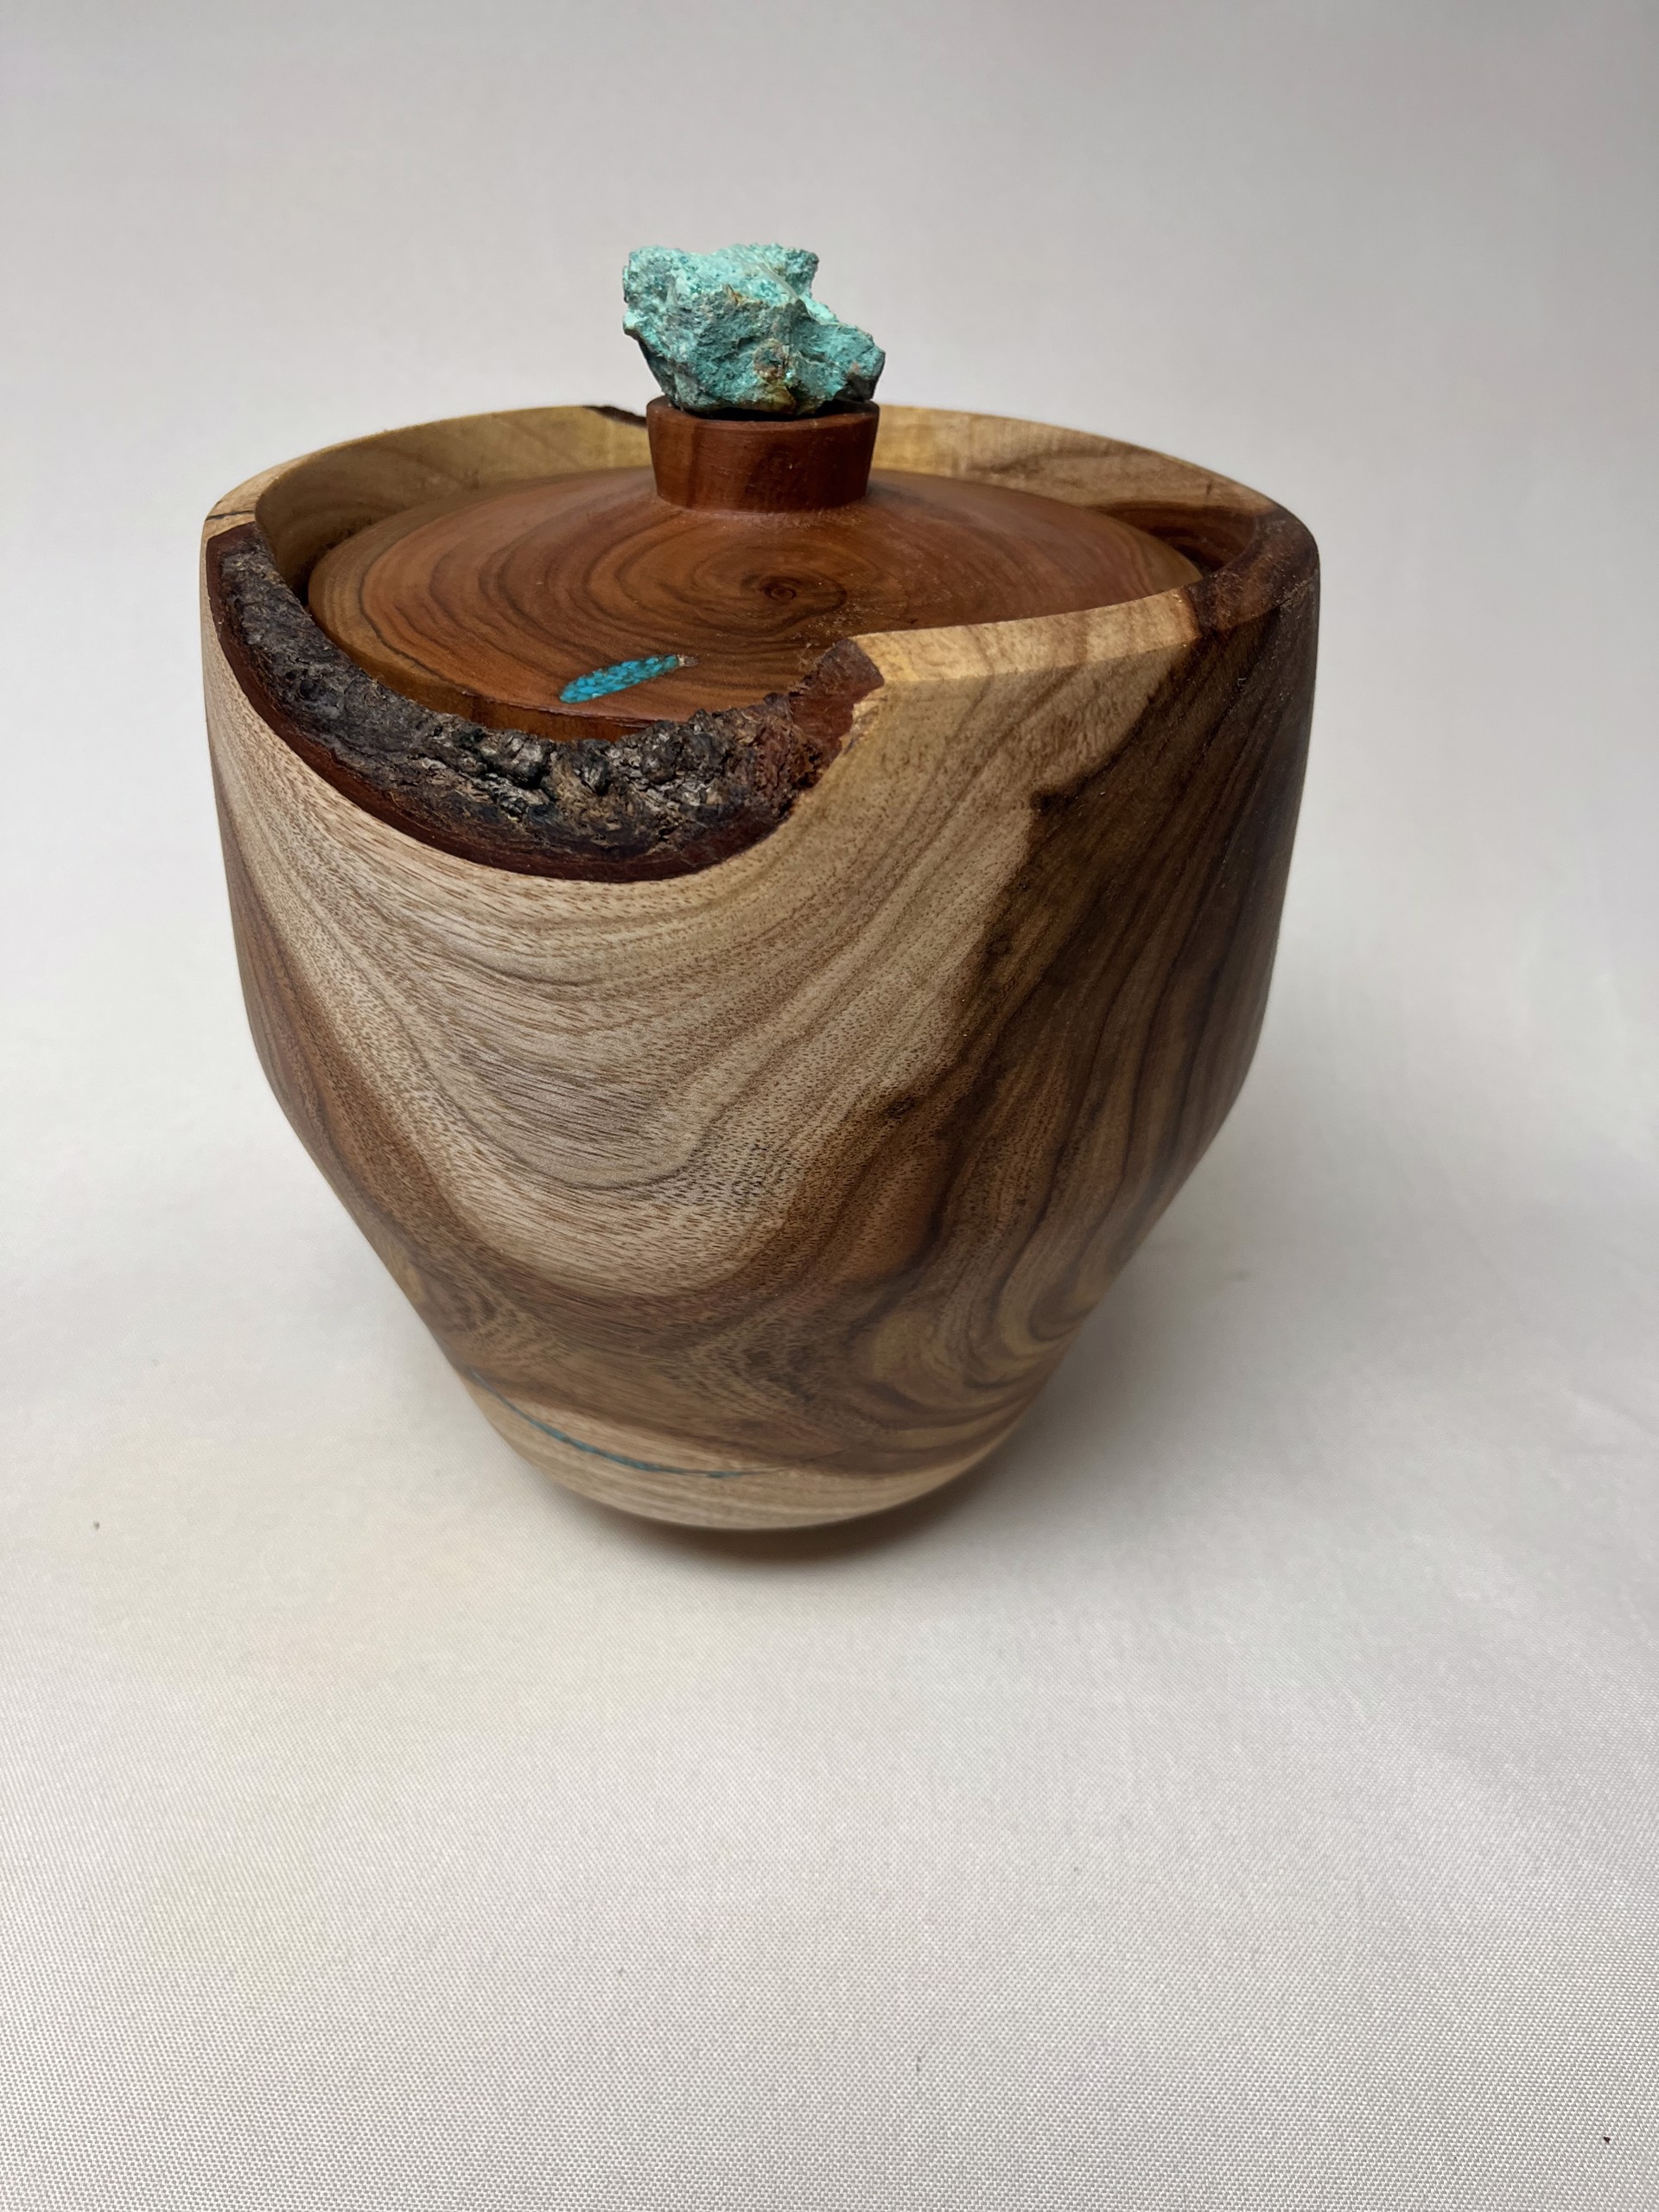 Turned Wood Jar W/Lid #22-103 by Rick Squires